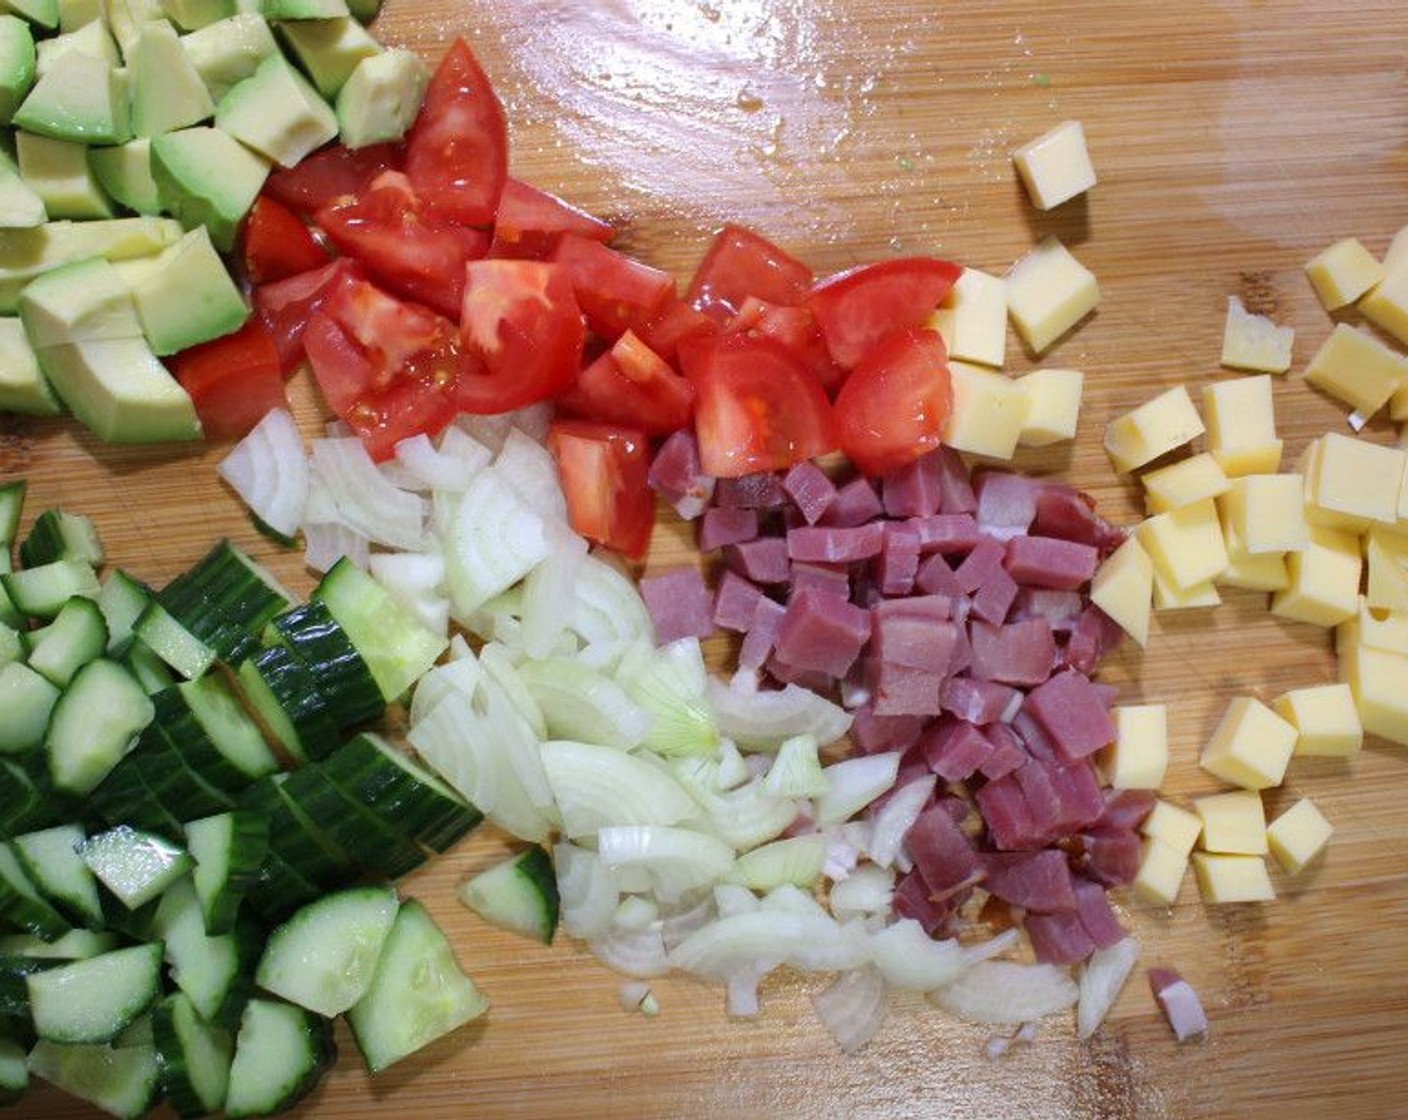 step 2 Dice the Gouda (1 1/4 cups), Smoked Beef (6 oz), Onion (1), Cucumber (1/2), Tomato (1) and Hass Avocado (1) to your preferred size.